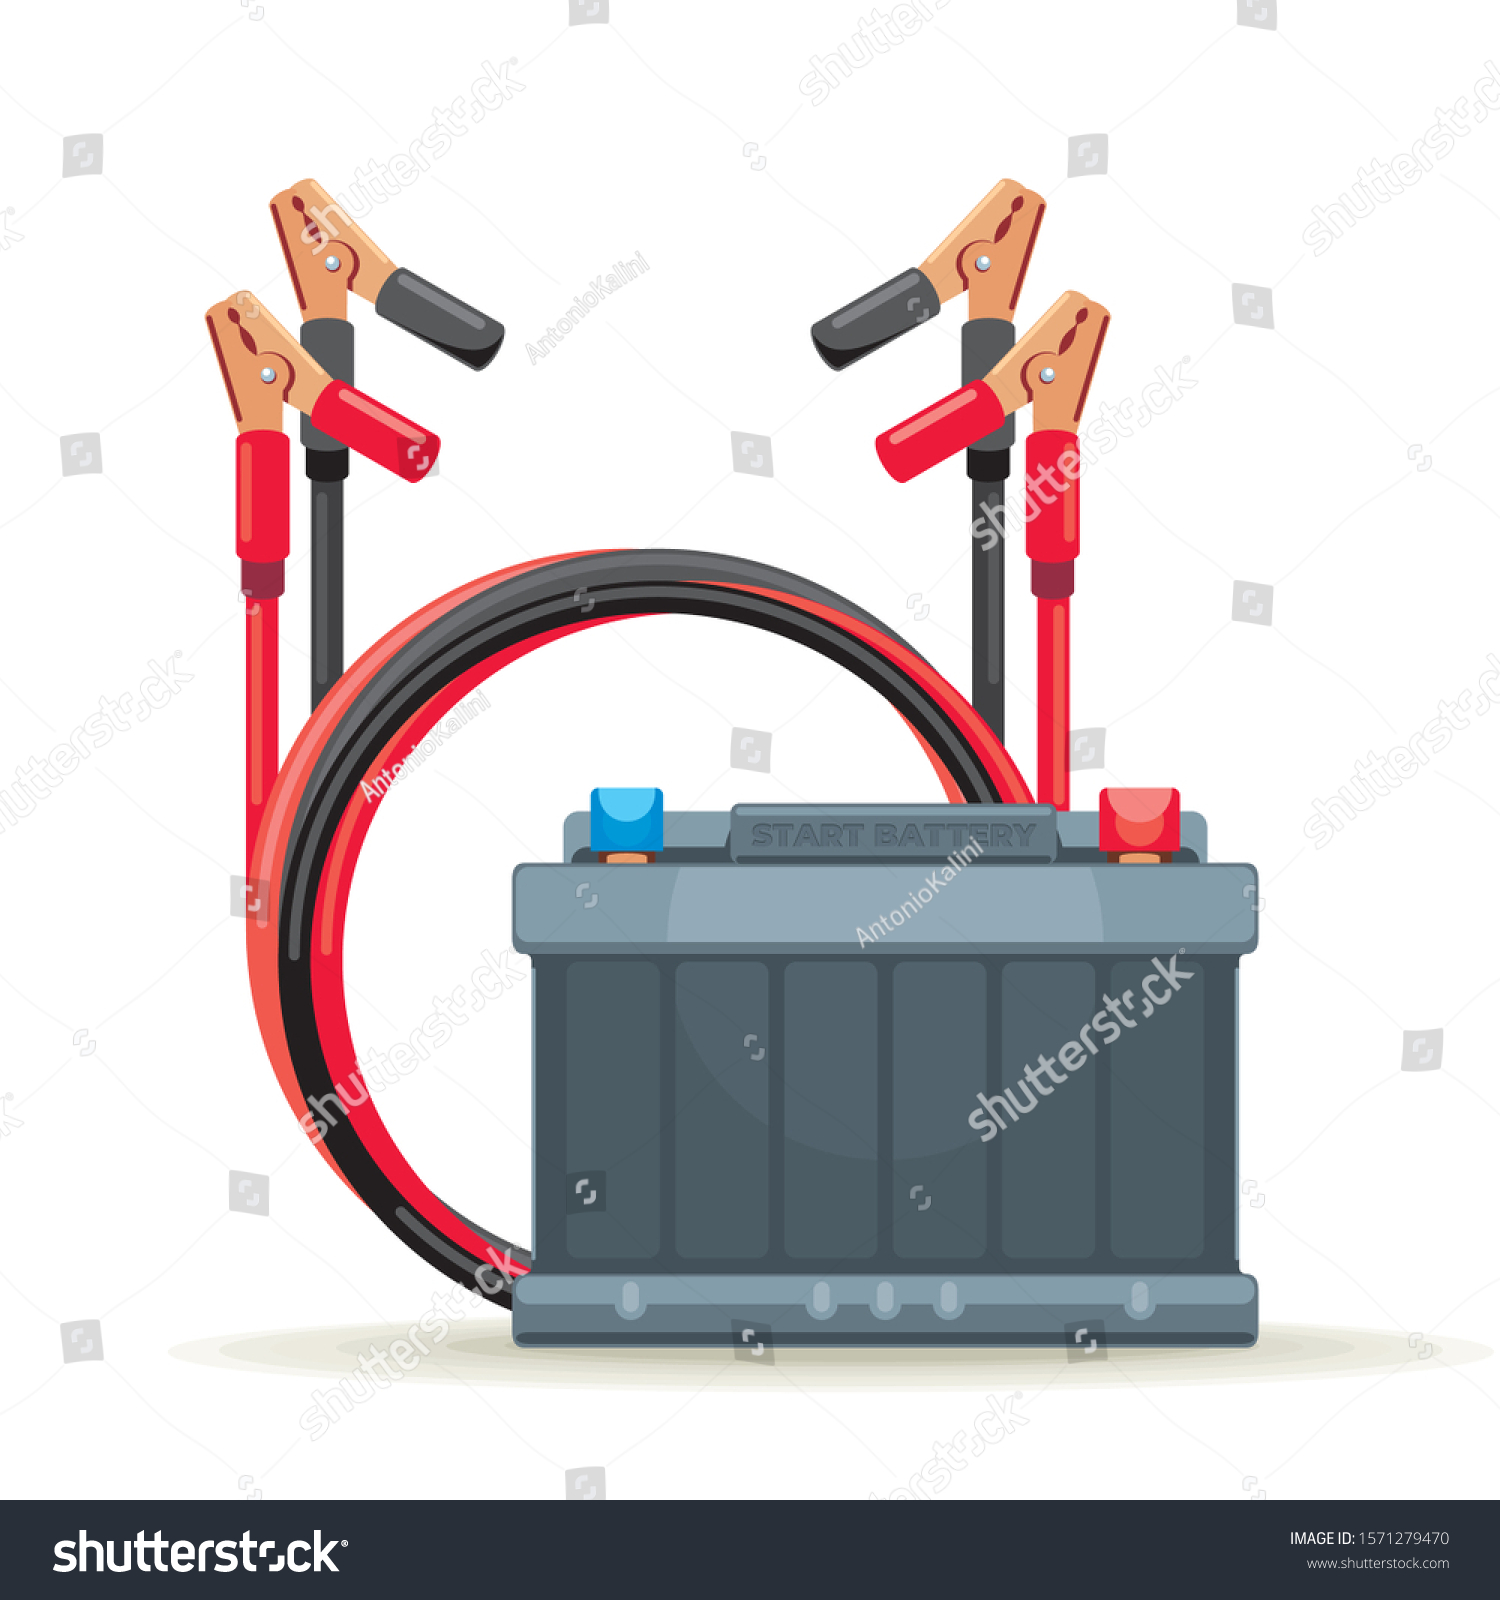 SVG of Battery jumper to charge a battery and start of car, vector illustration. svg